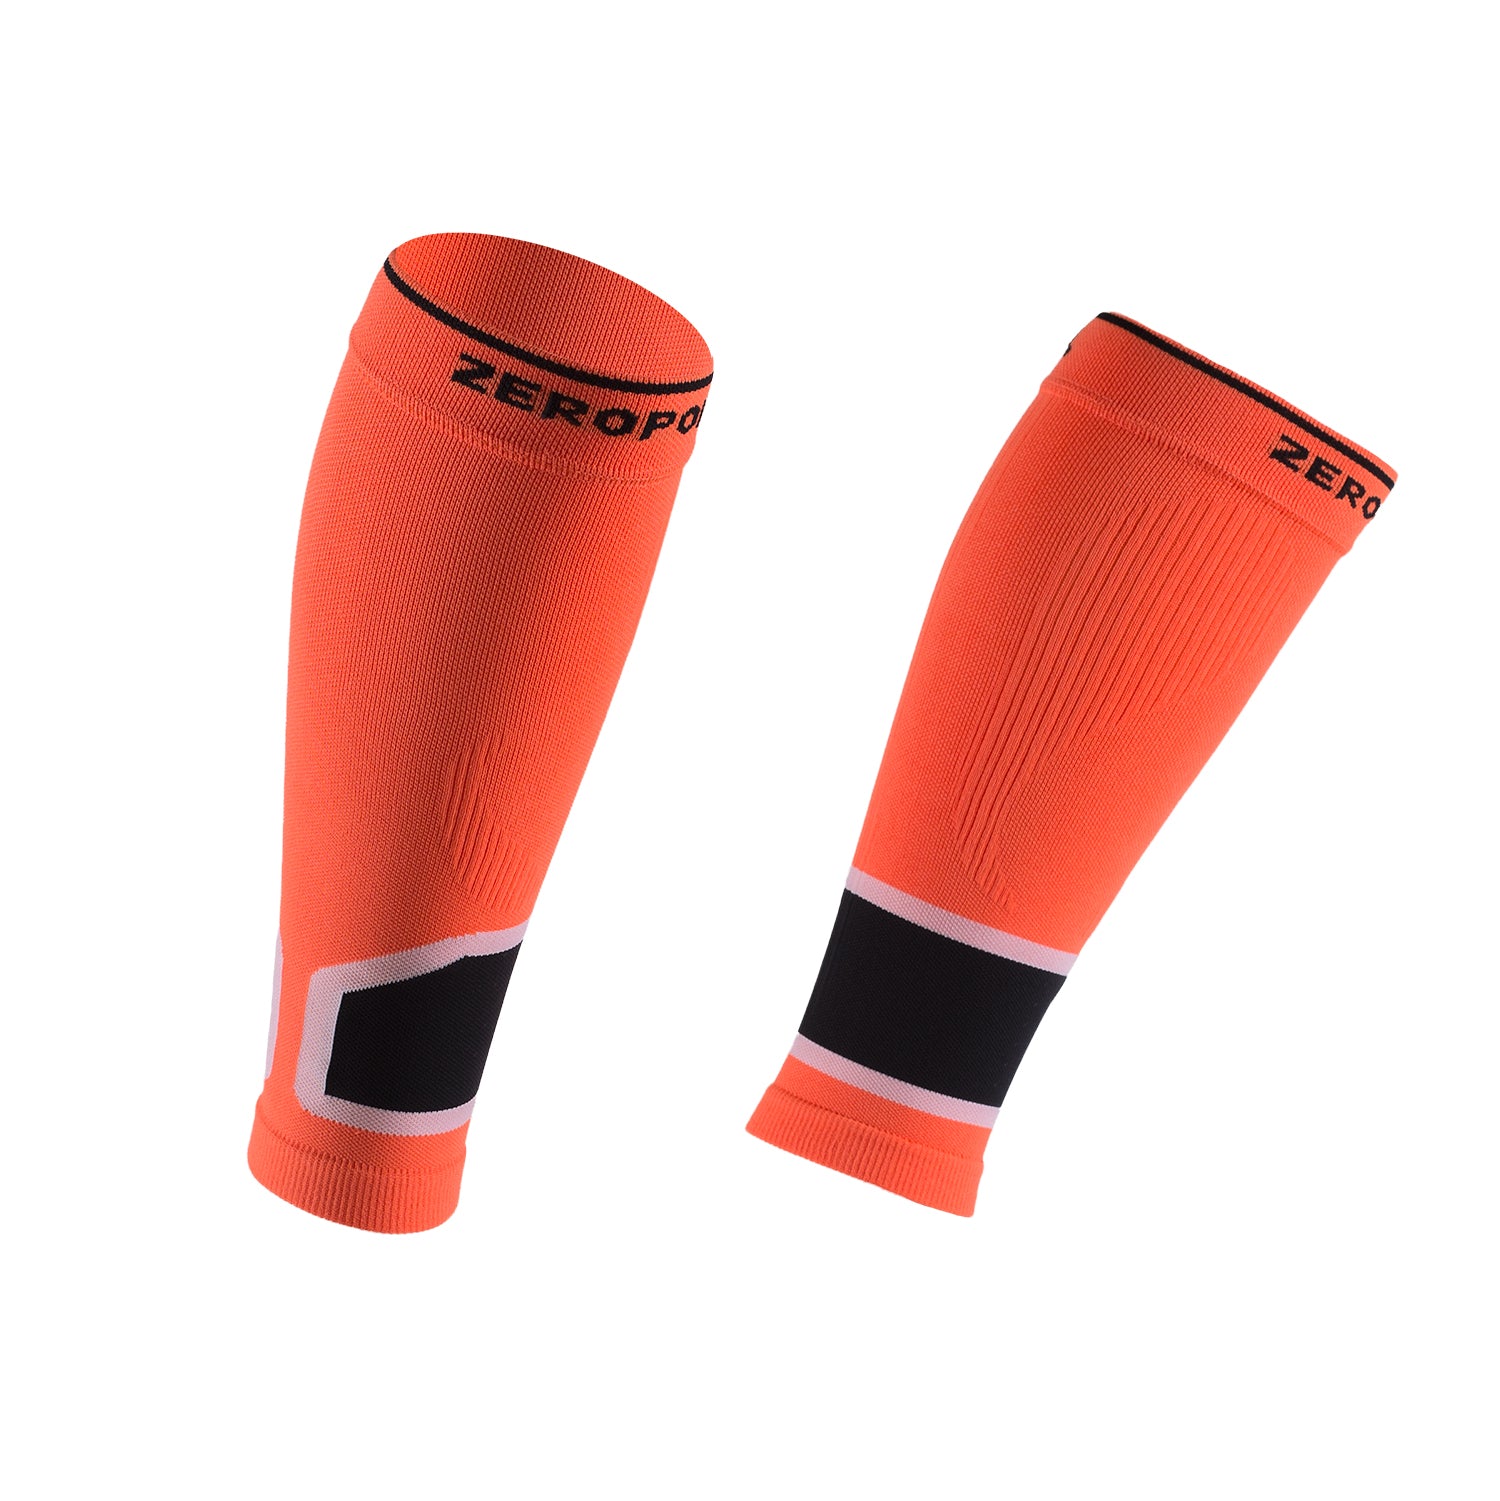 ZEROPOINT Intense 2.0 High Compression Calf Sleeves